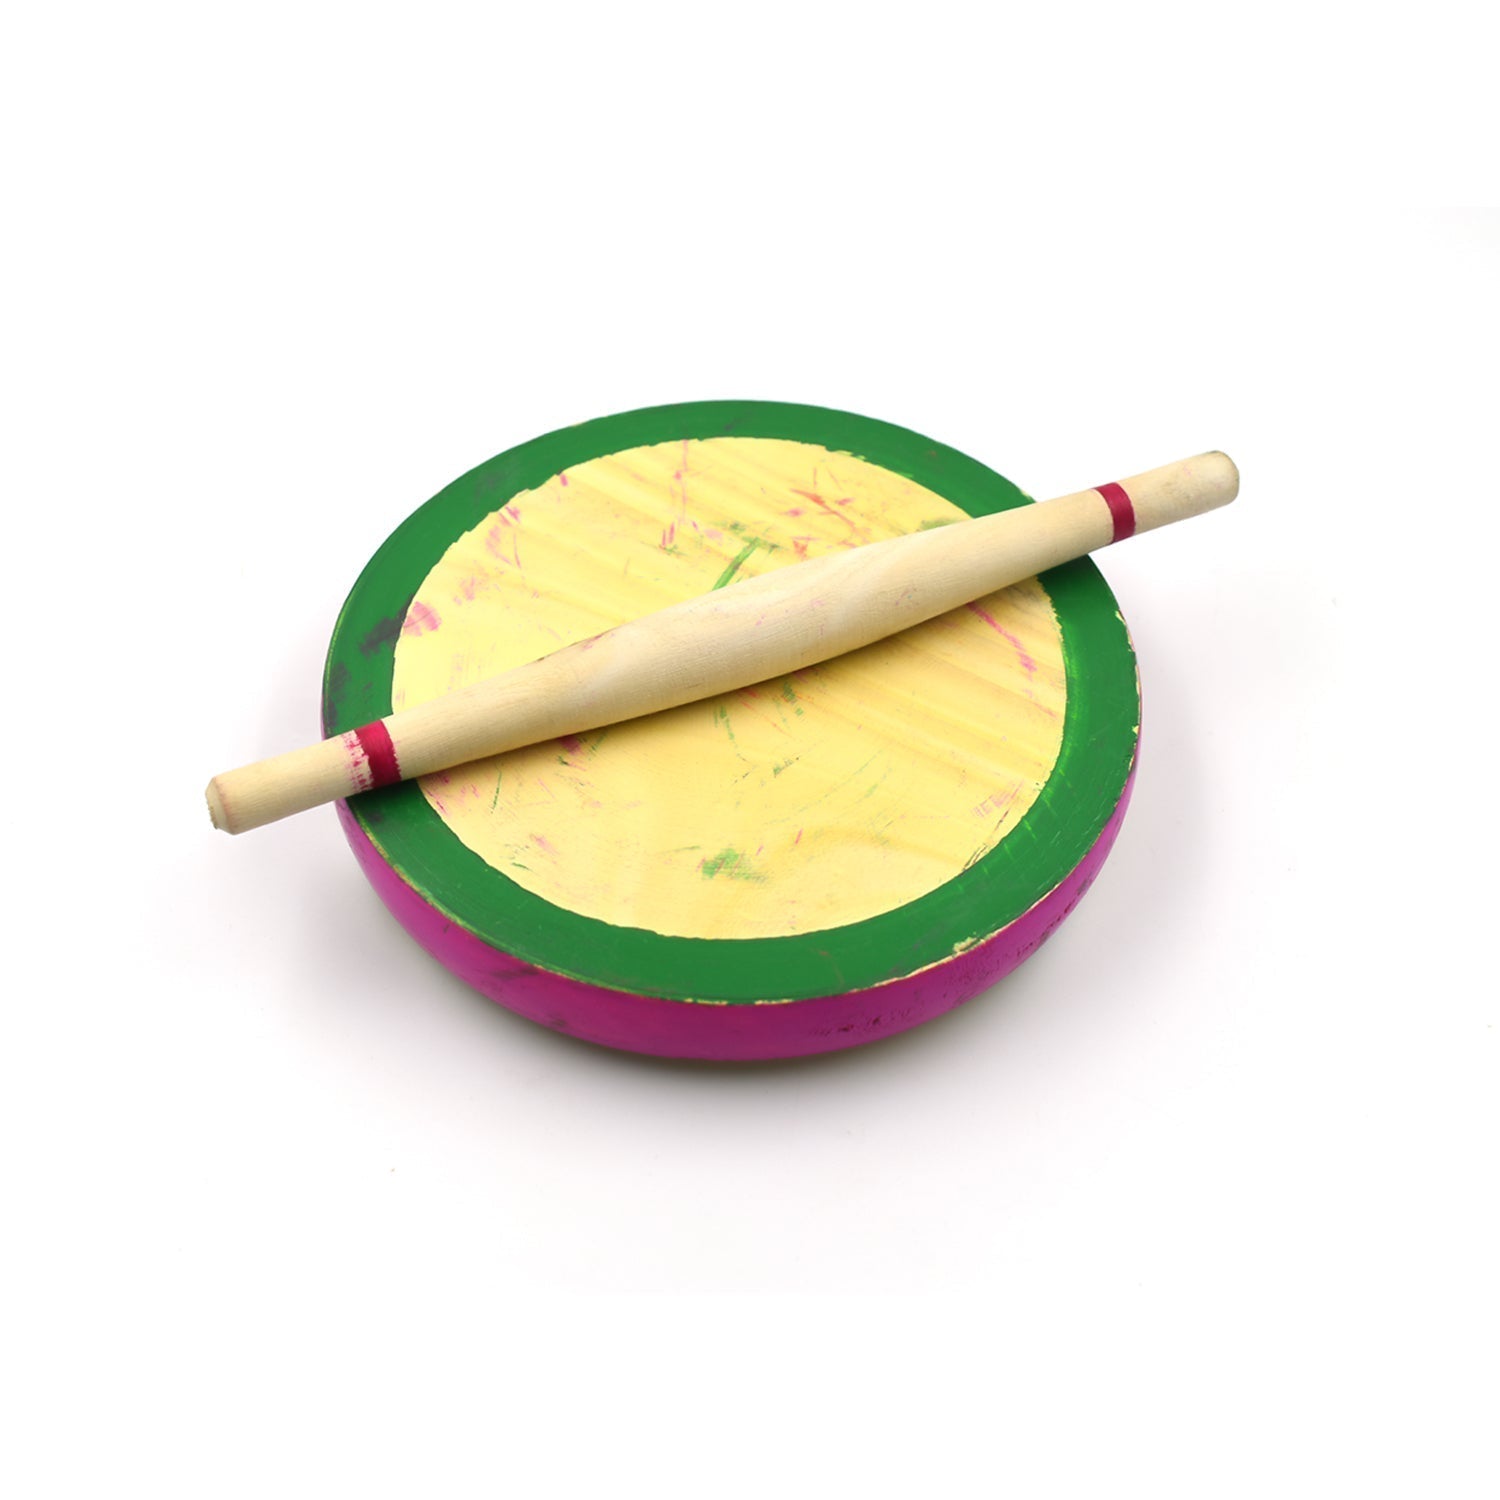 2695 Kids Chakla Belan Set used in all kinds of household places by kids and children’s for playing purposes etc.